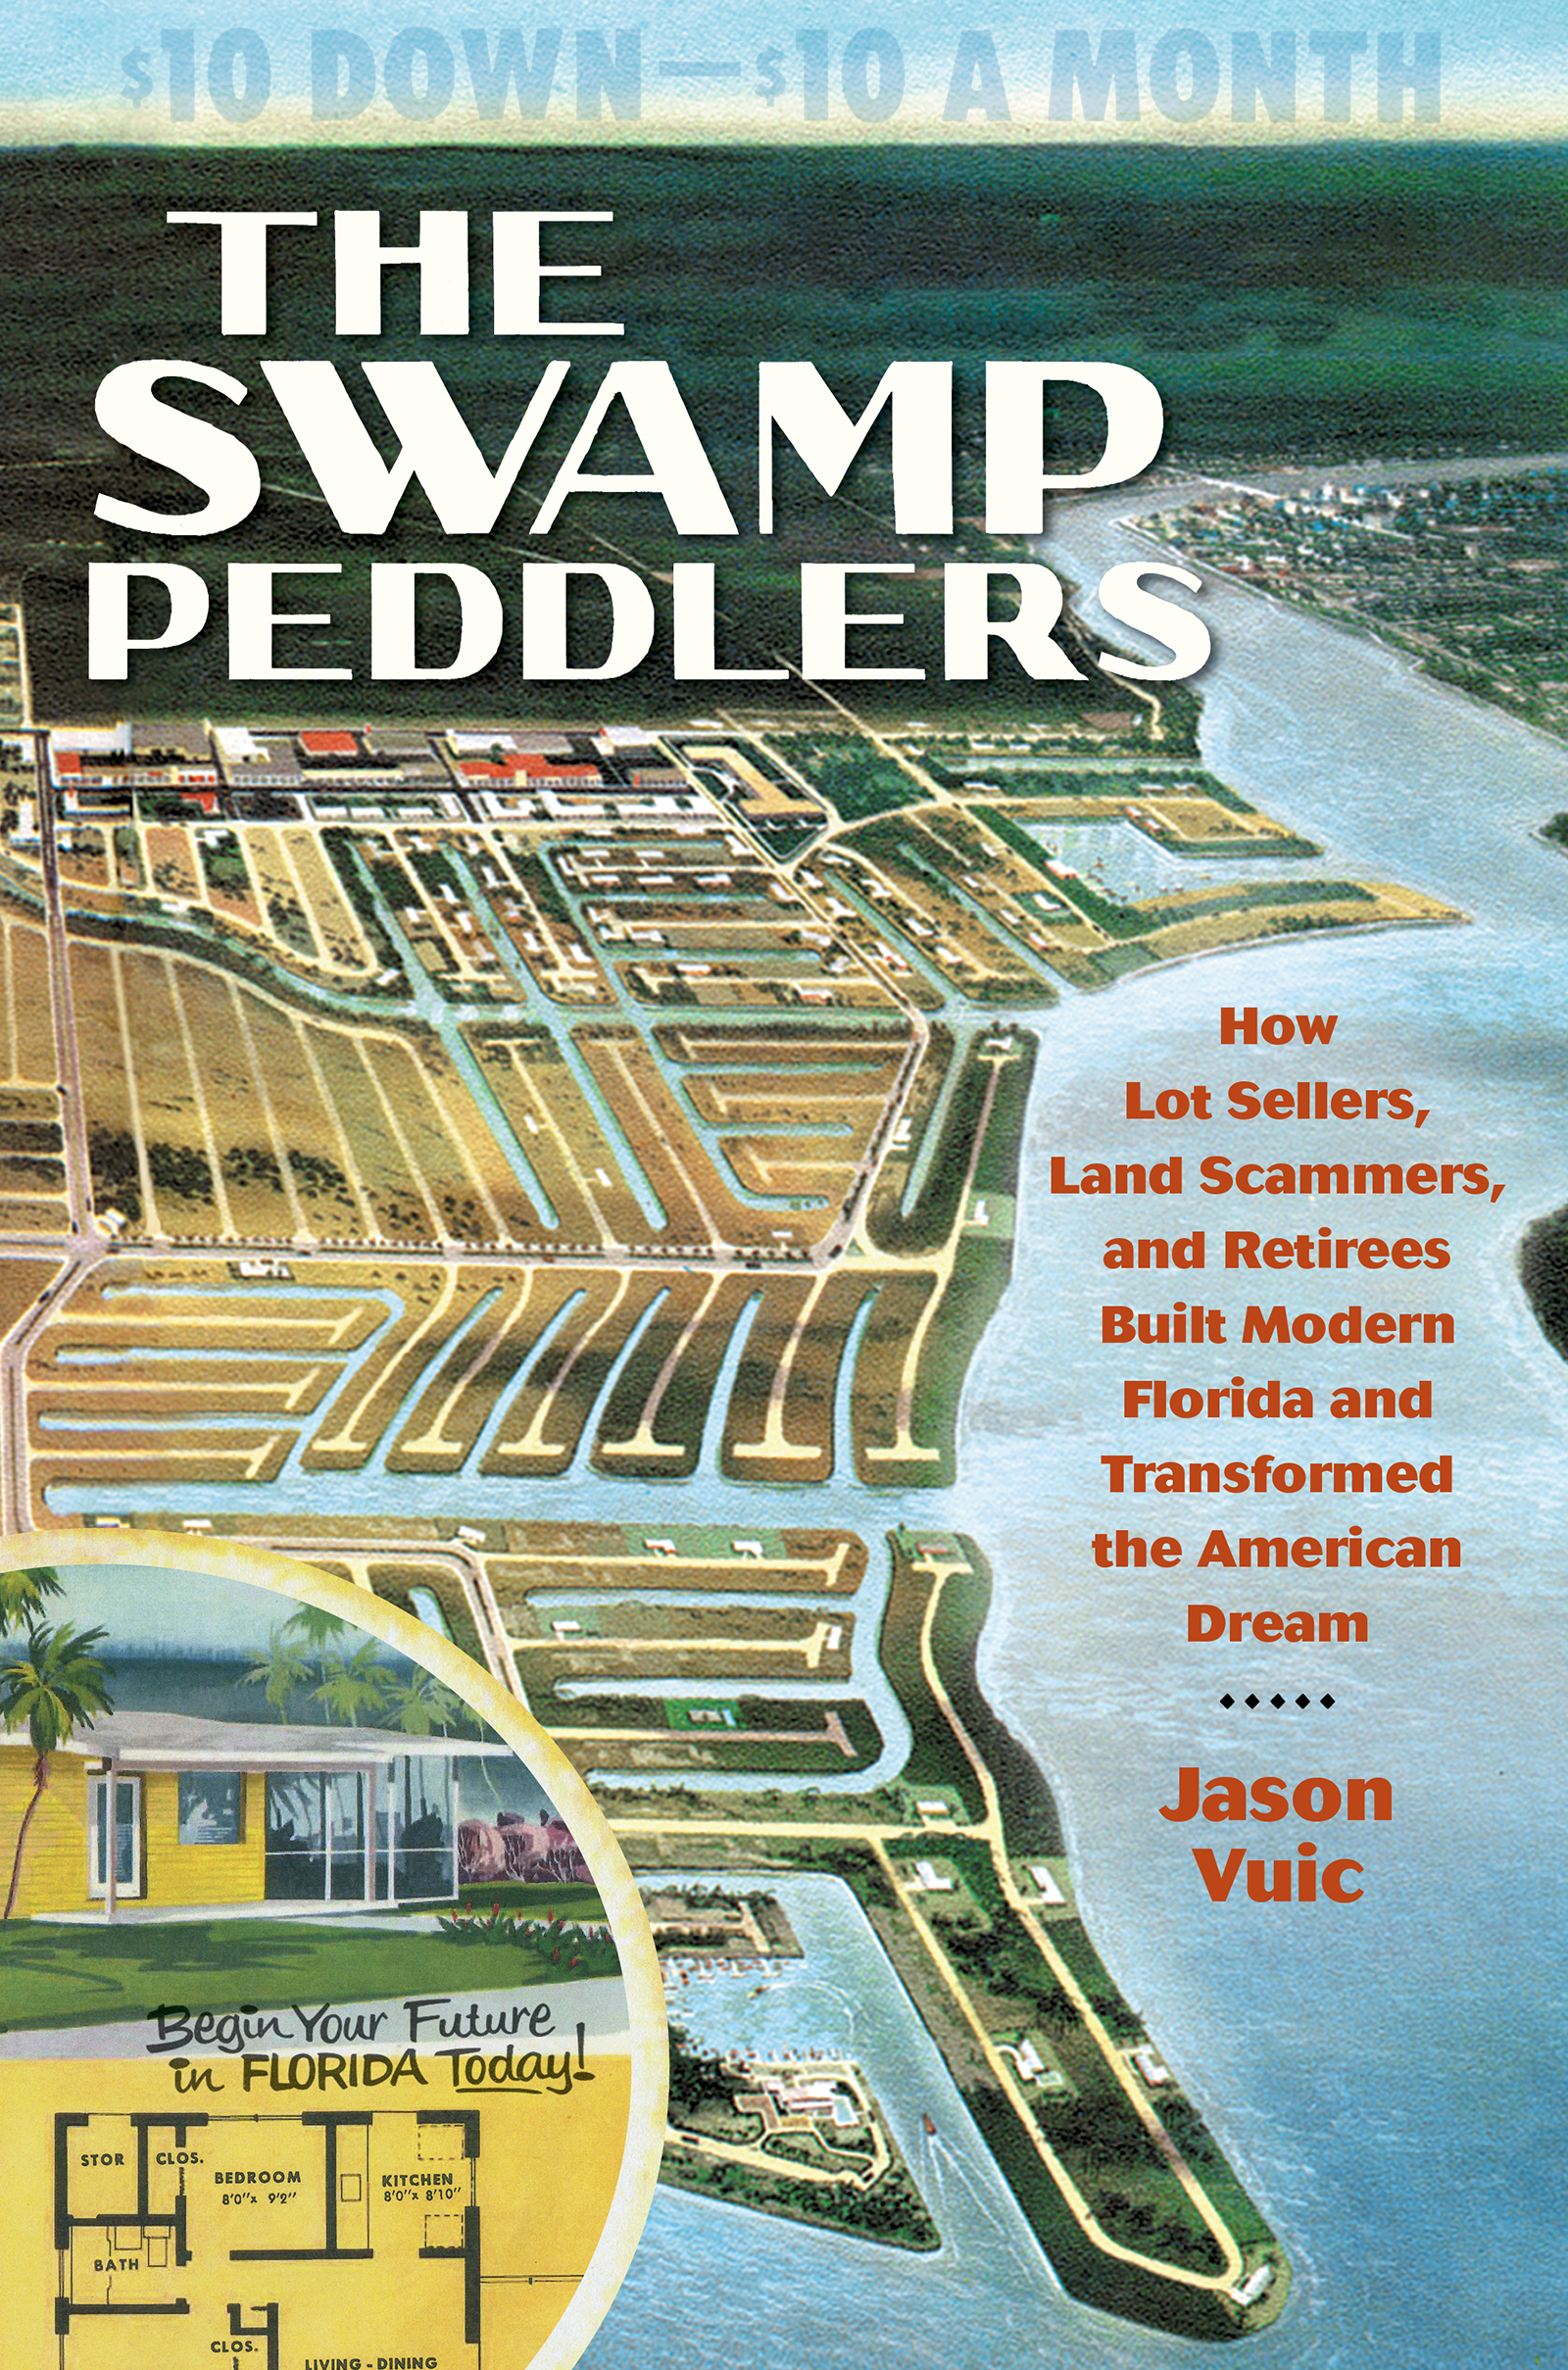 Umschlagbild für The Swamp Peddlers [electronic resource] : How Lot Sellers, Land Scammers, and Retirees Built Modern Florida and Transformed the American Dream